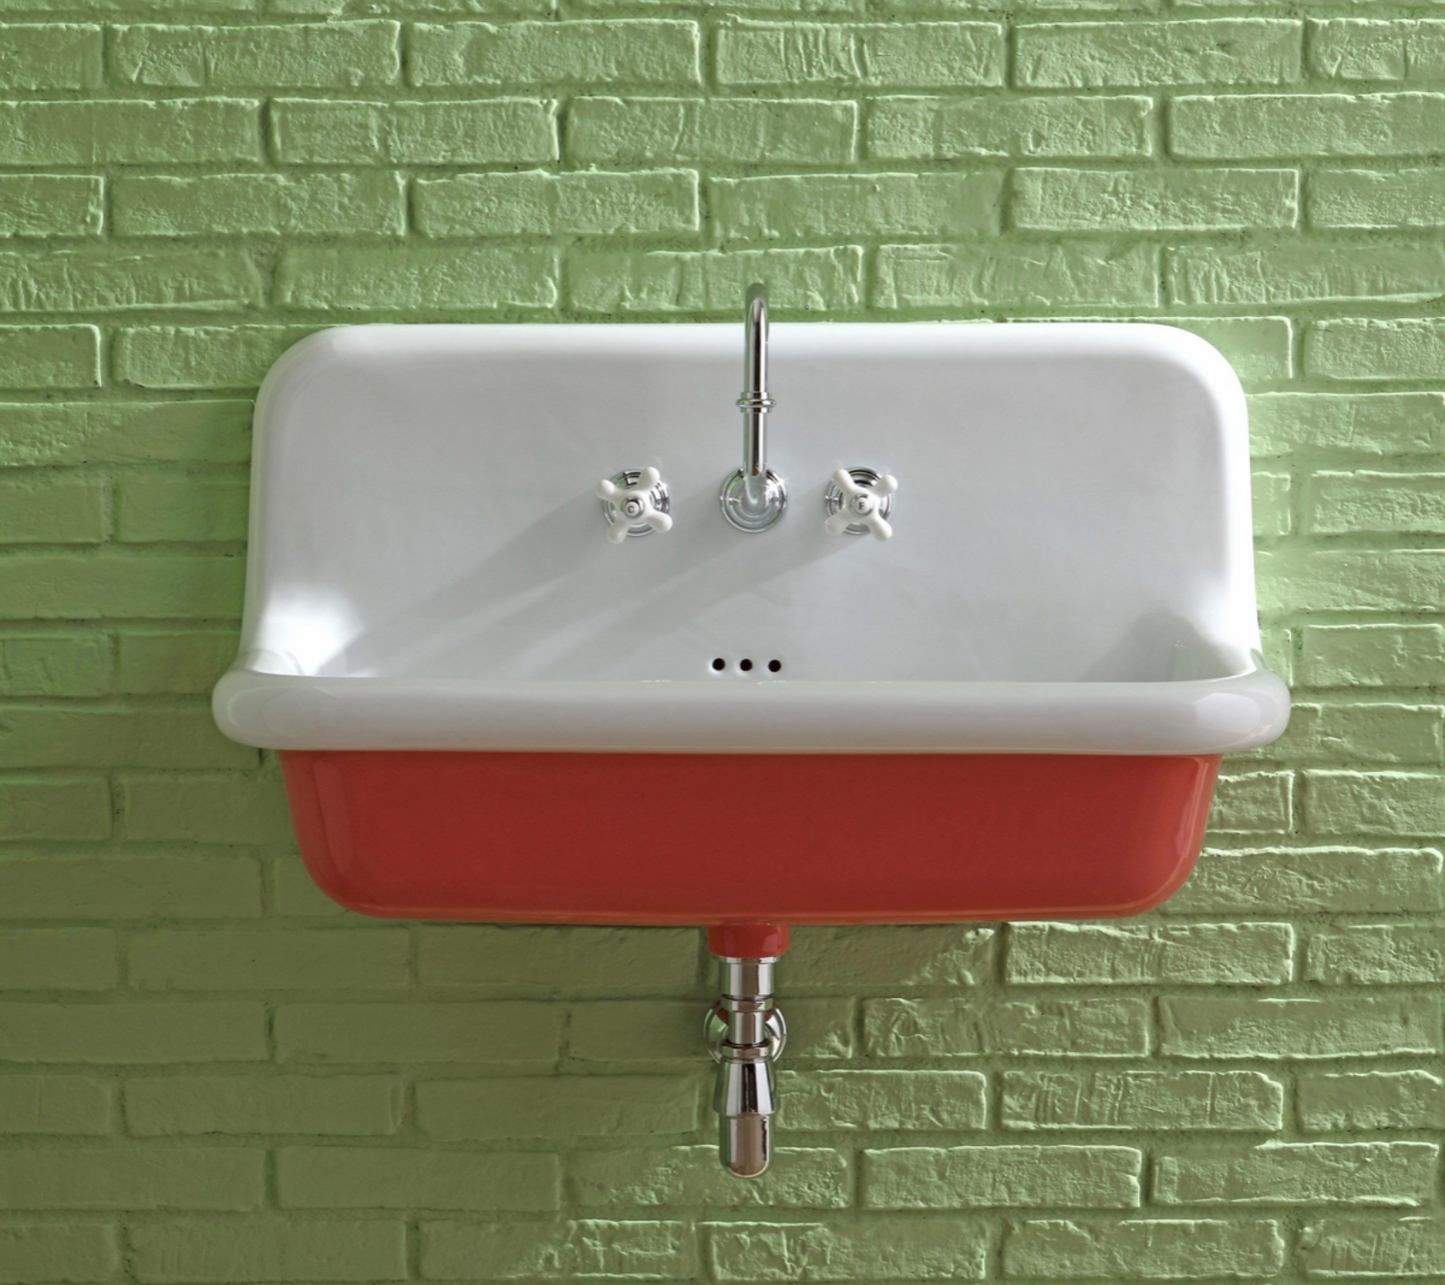 Built-in high-neck washbasin taps for True Colors Vintage-style washbasins